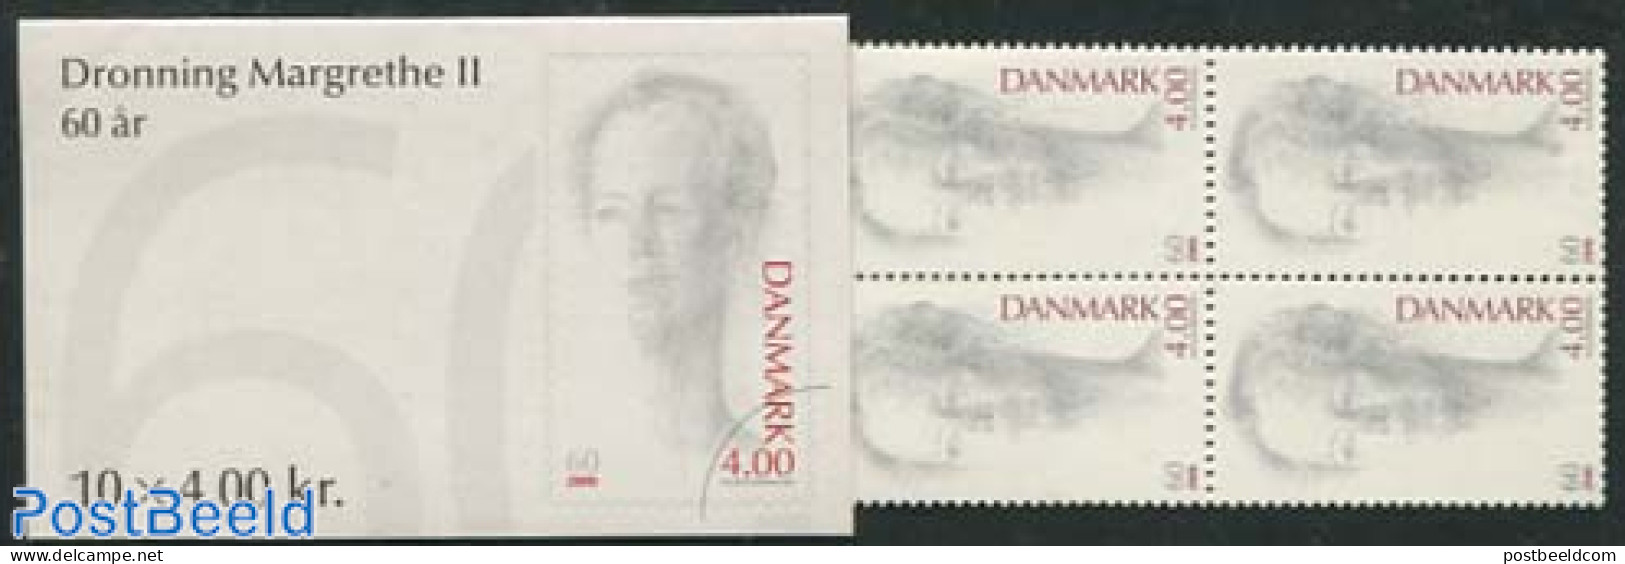 Denmark 2000 Queen Margrethe II Birthday Booklet, Mint NH, History - Kings & Queens (Royalty) - Stamp Booklets - Unused Stamps